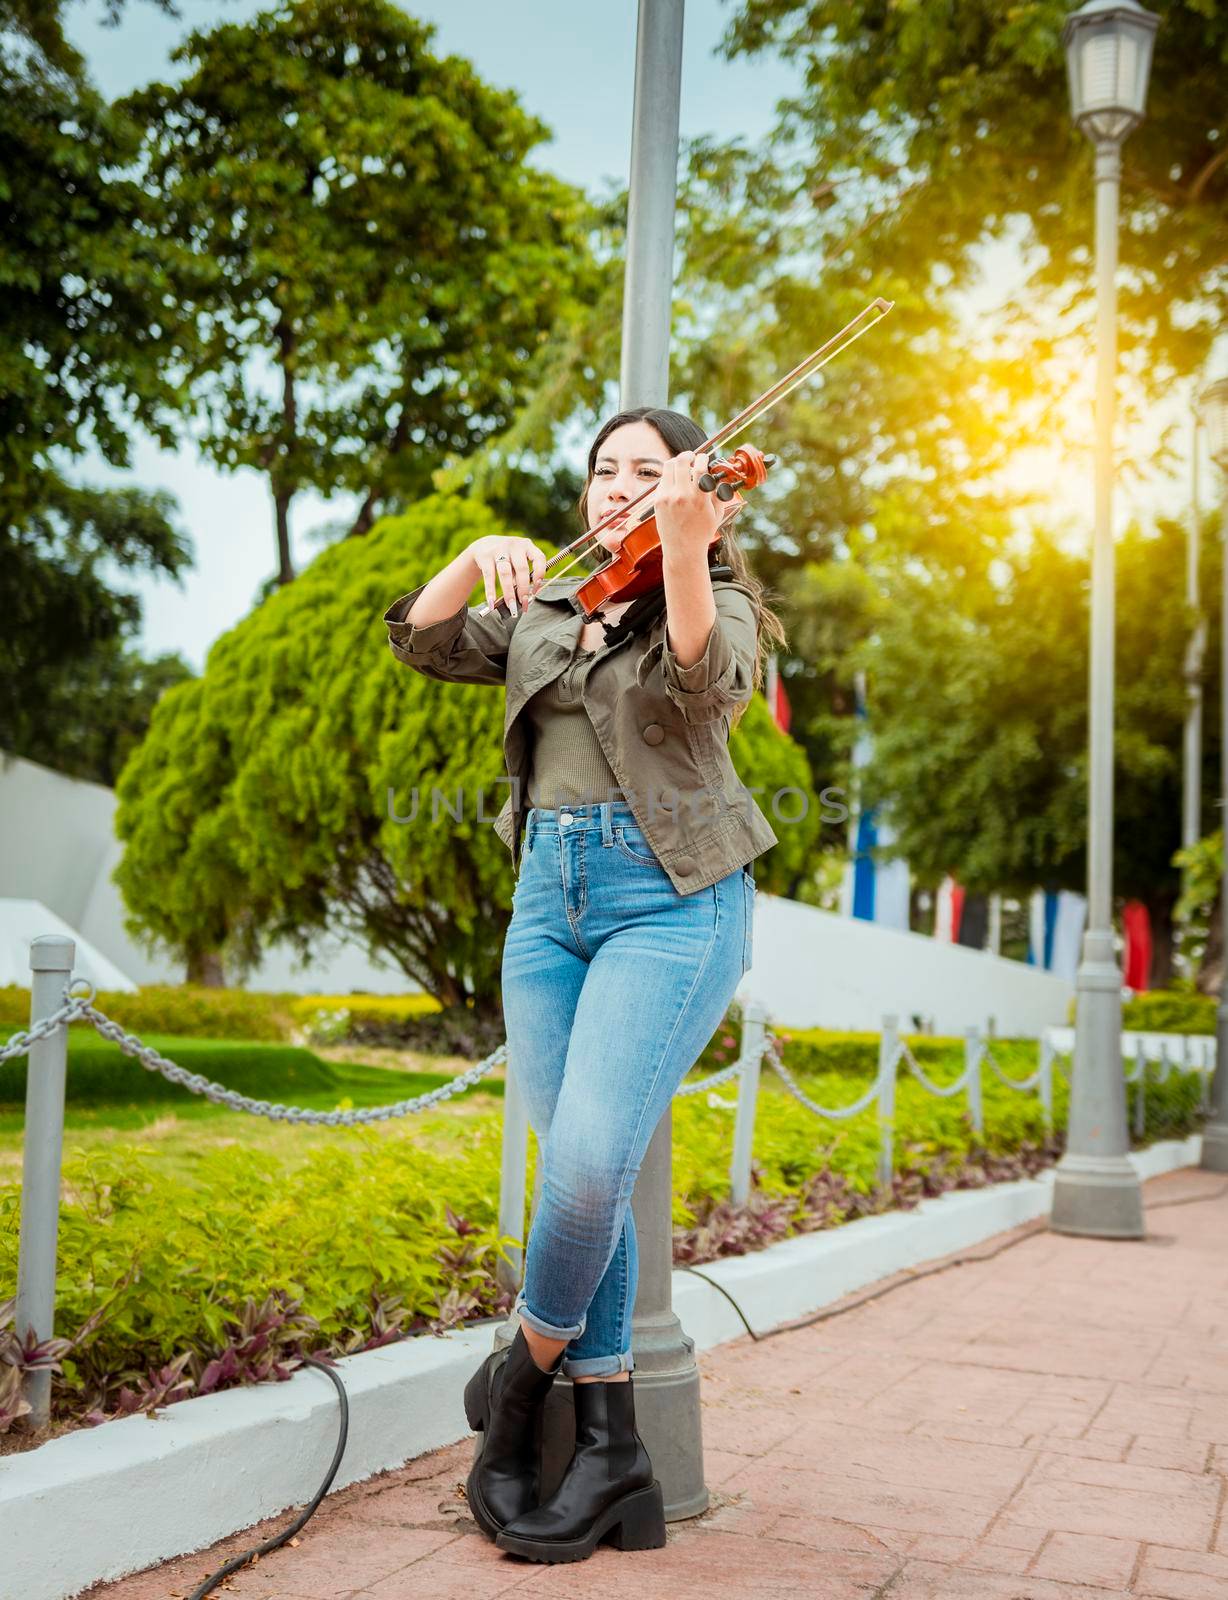 Woman playing violin in the street. Portrait of violinist girl playing in the street. Woman artist playing violin outdoors, Girl lying down playing violin in a park by isaiphoto